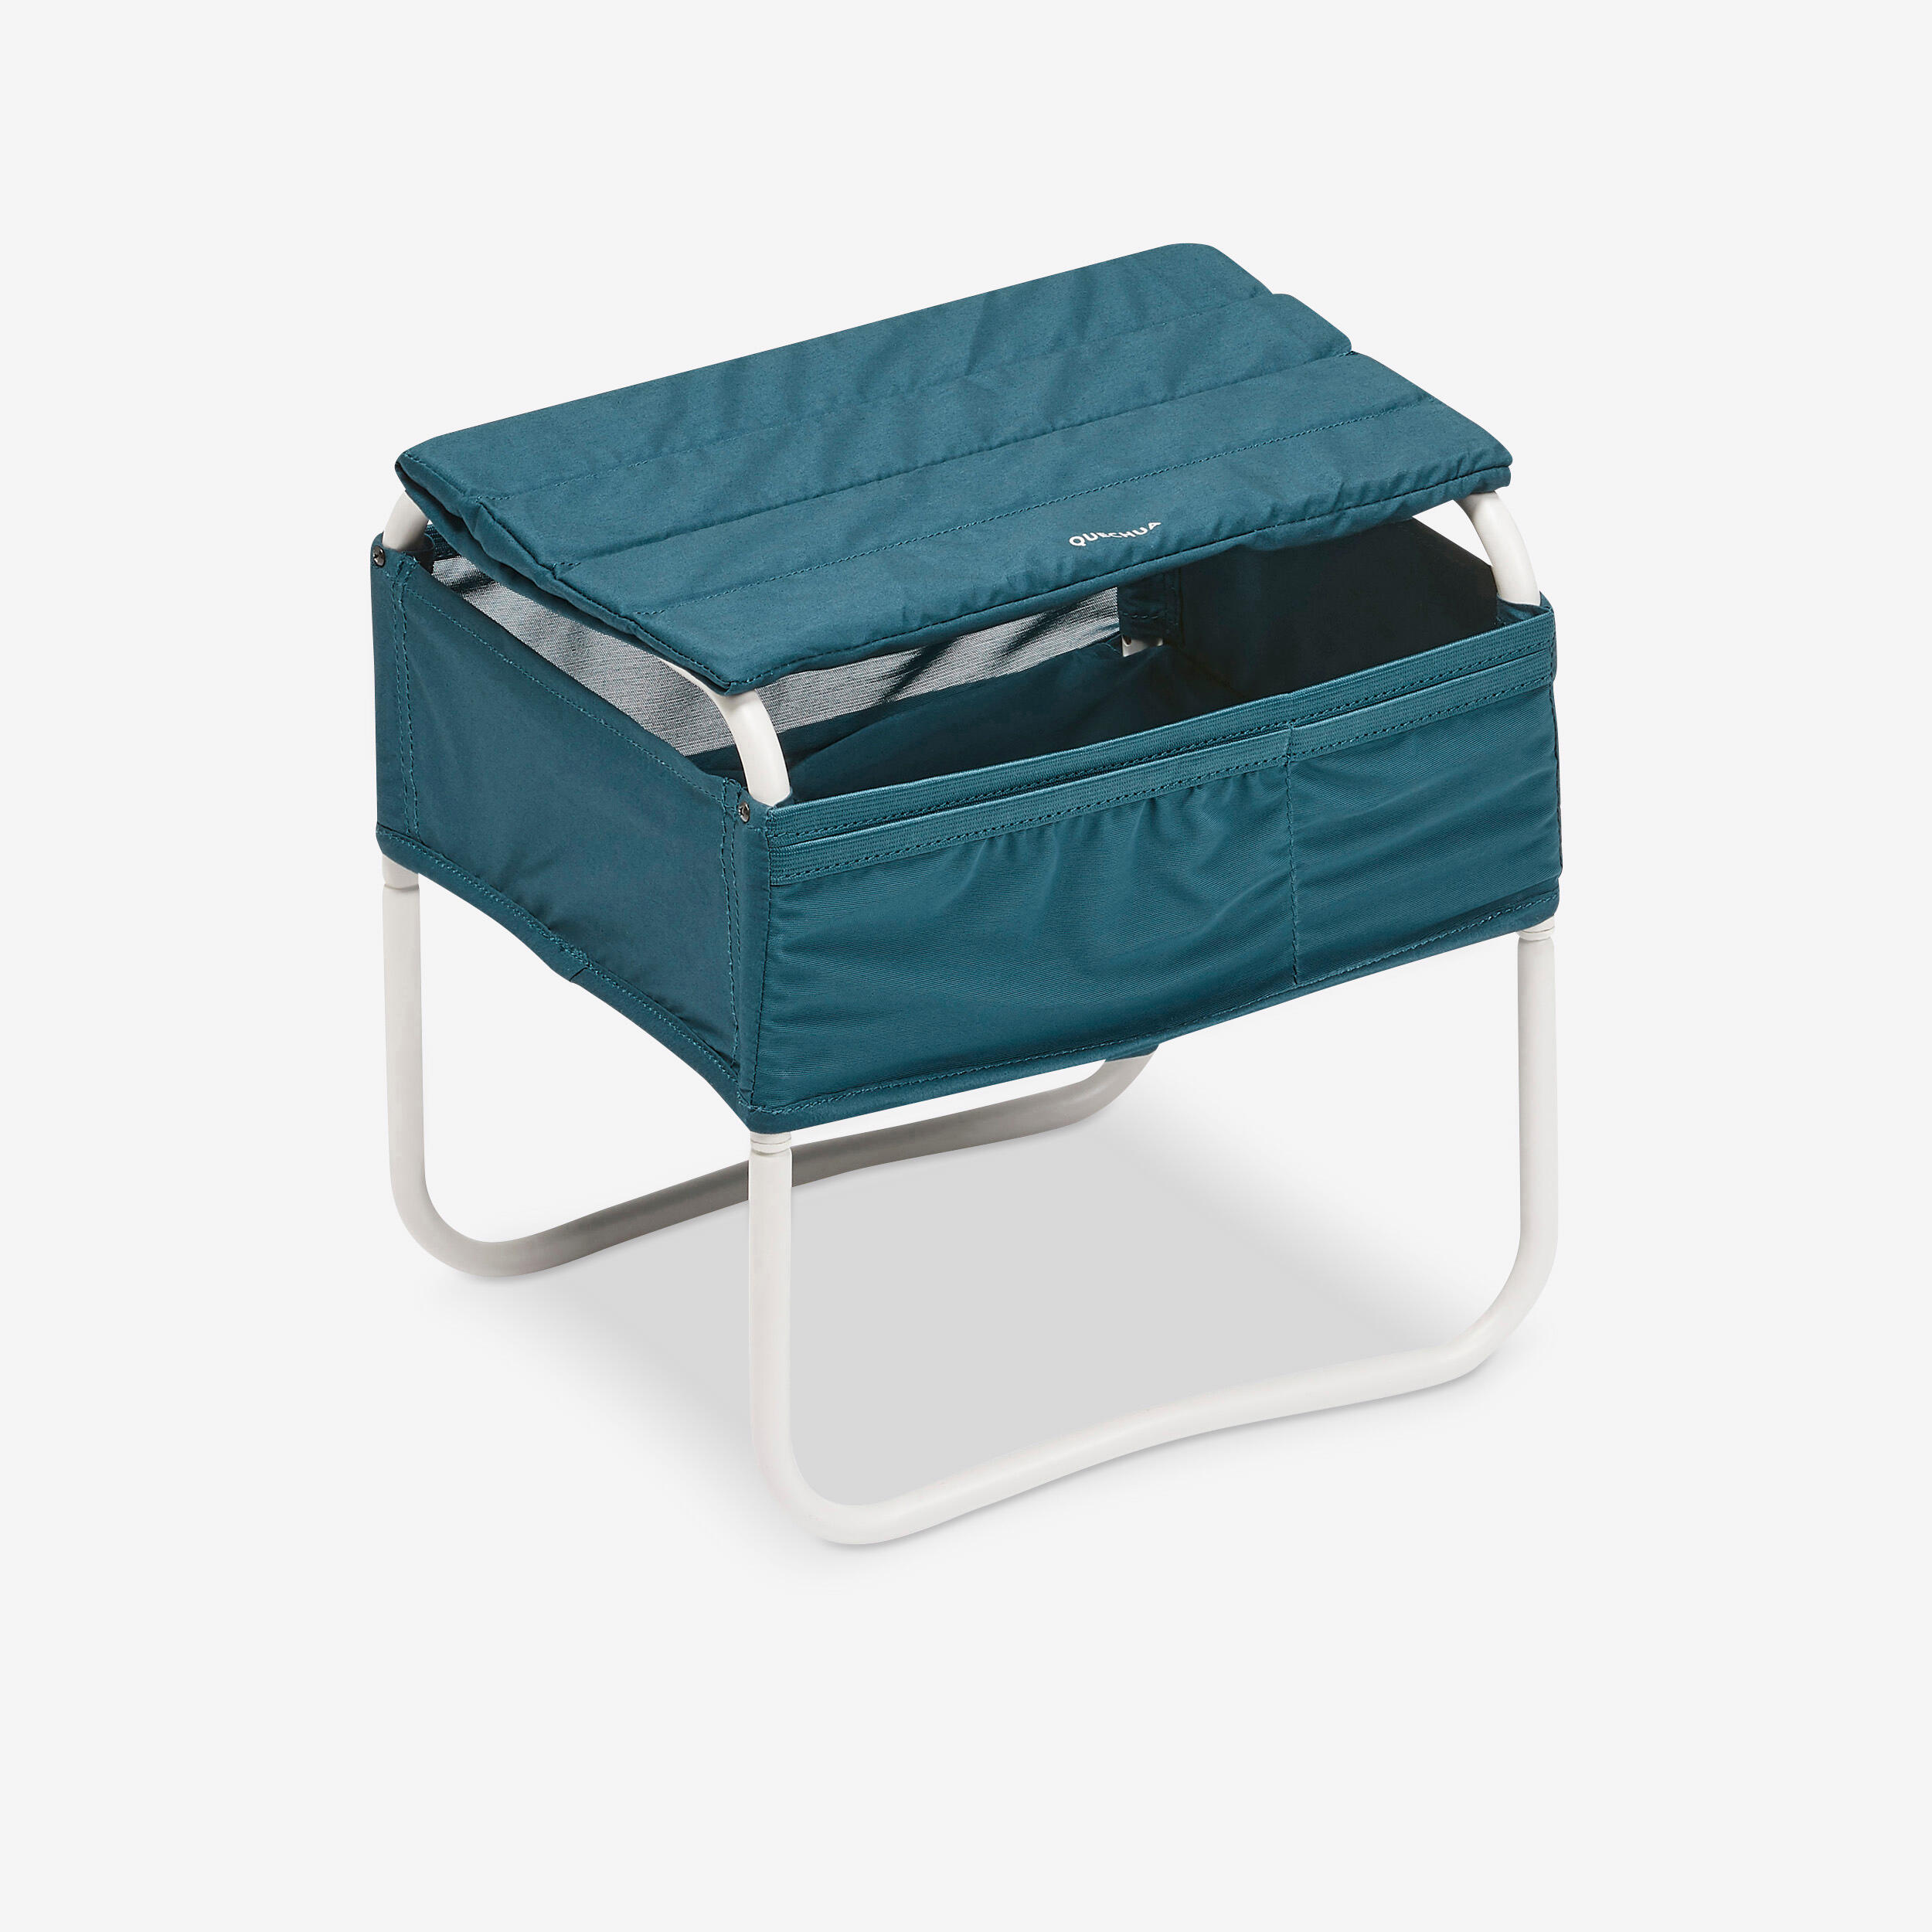 QUECHUA Camping bedside table - Compact